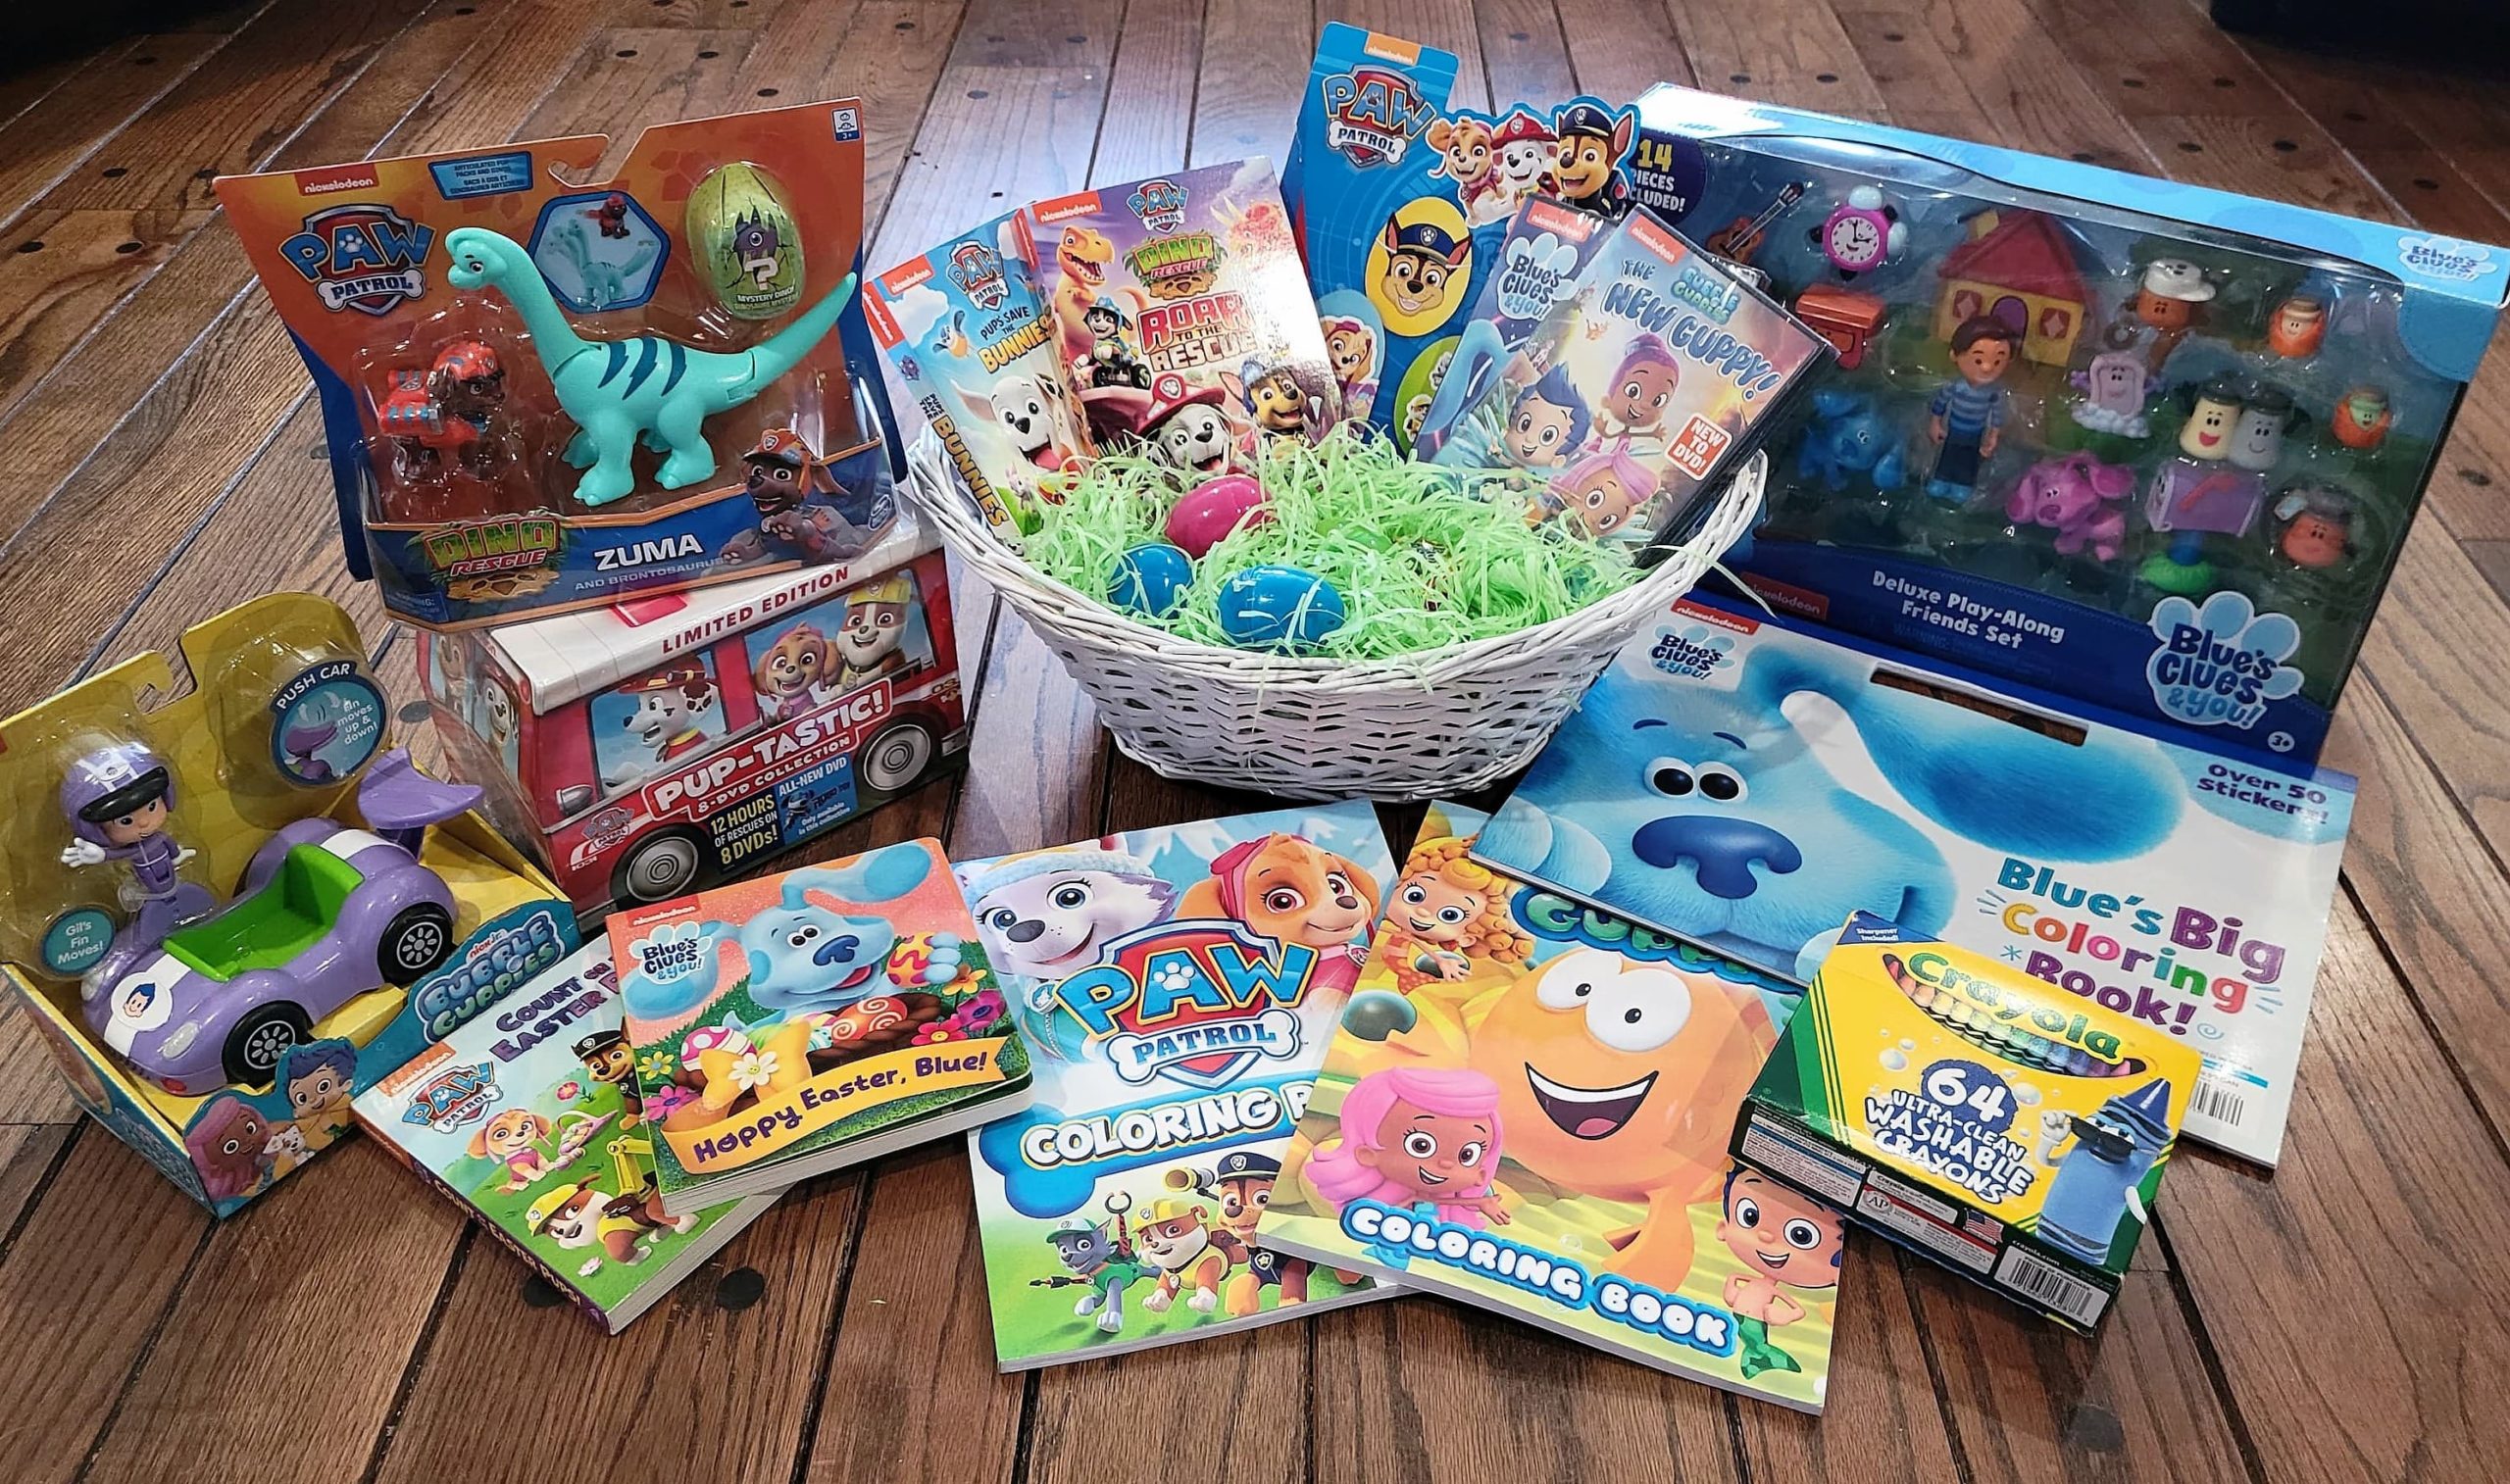 Nickelodeon Gift Ideas For Kids!